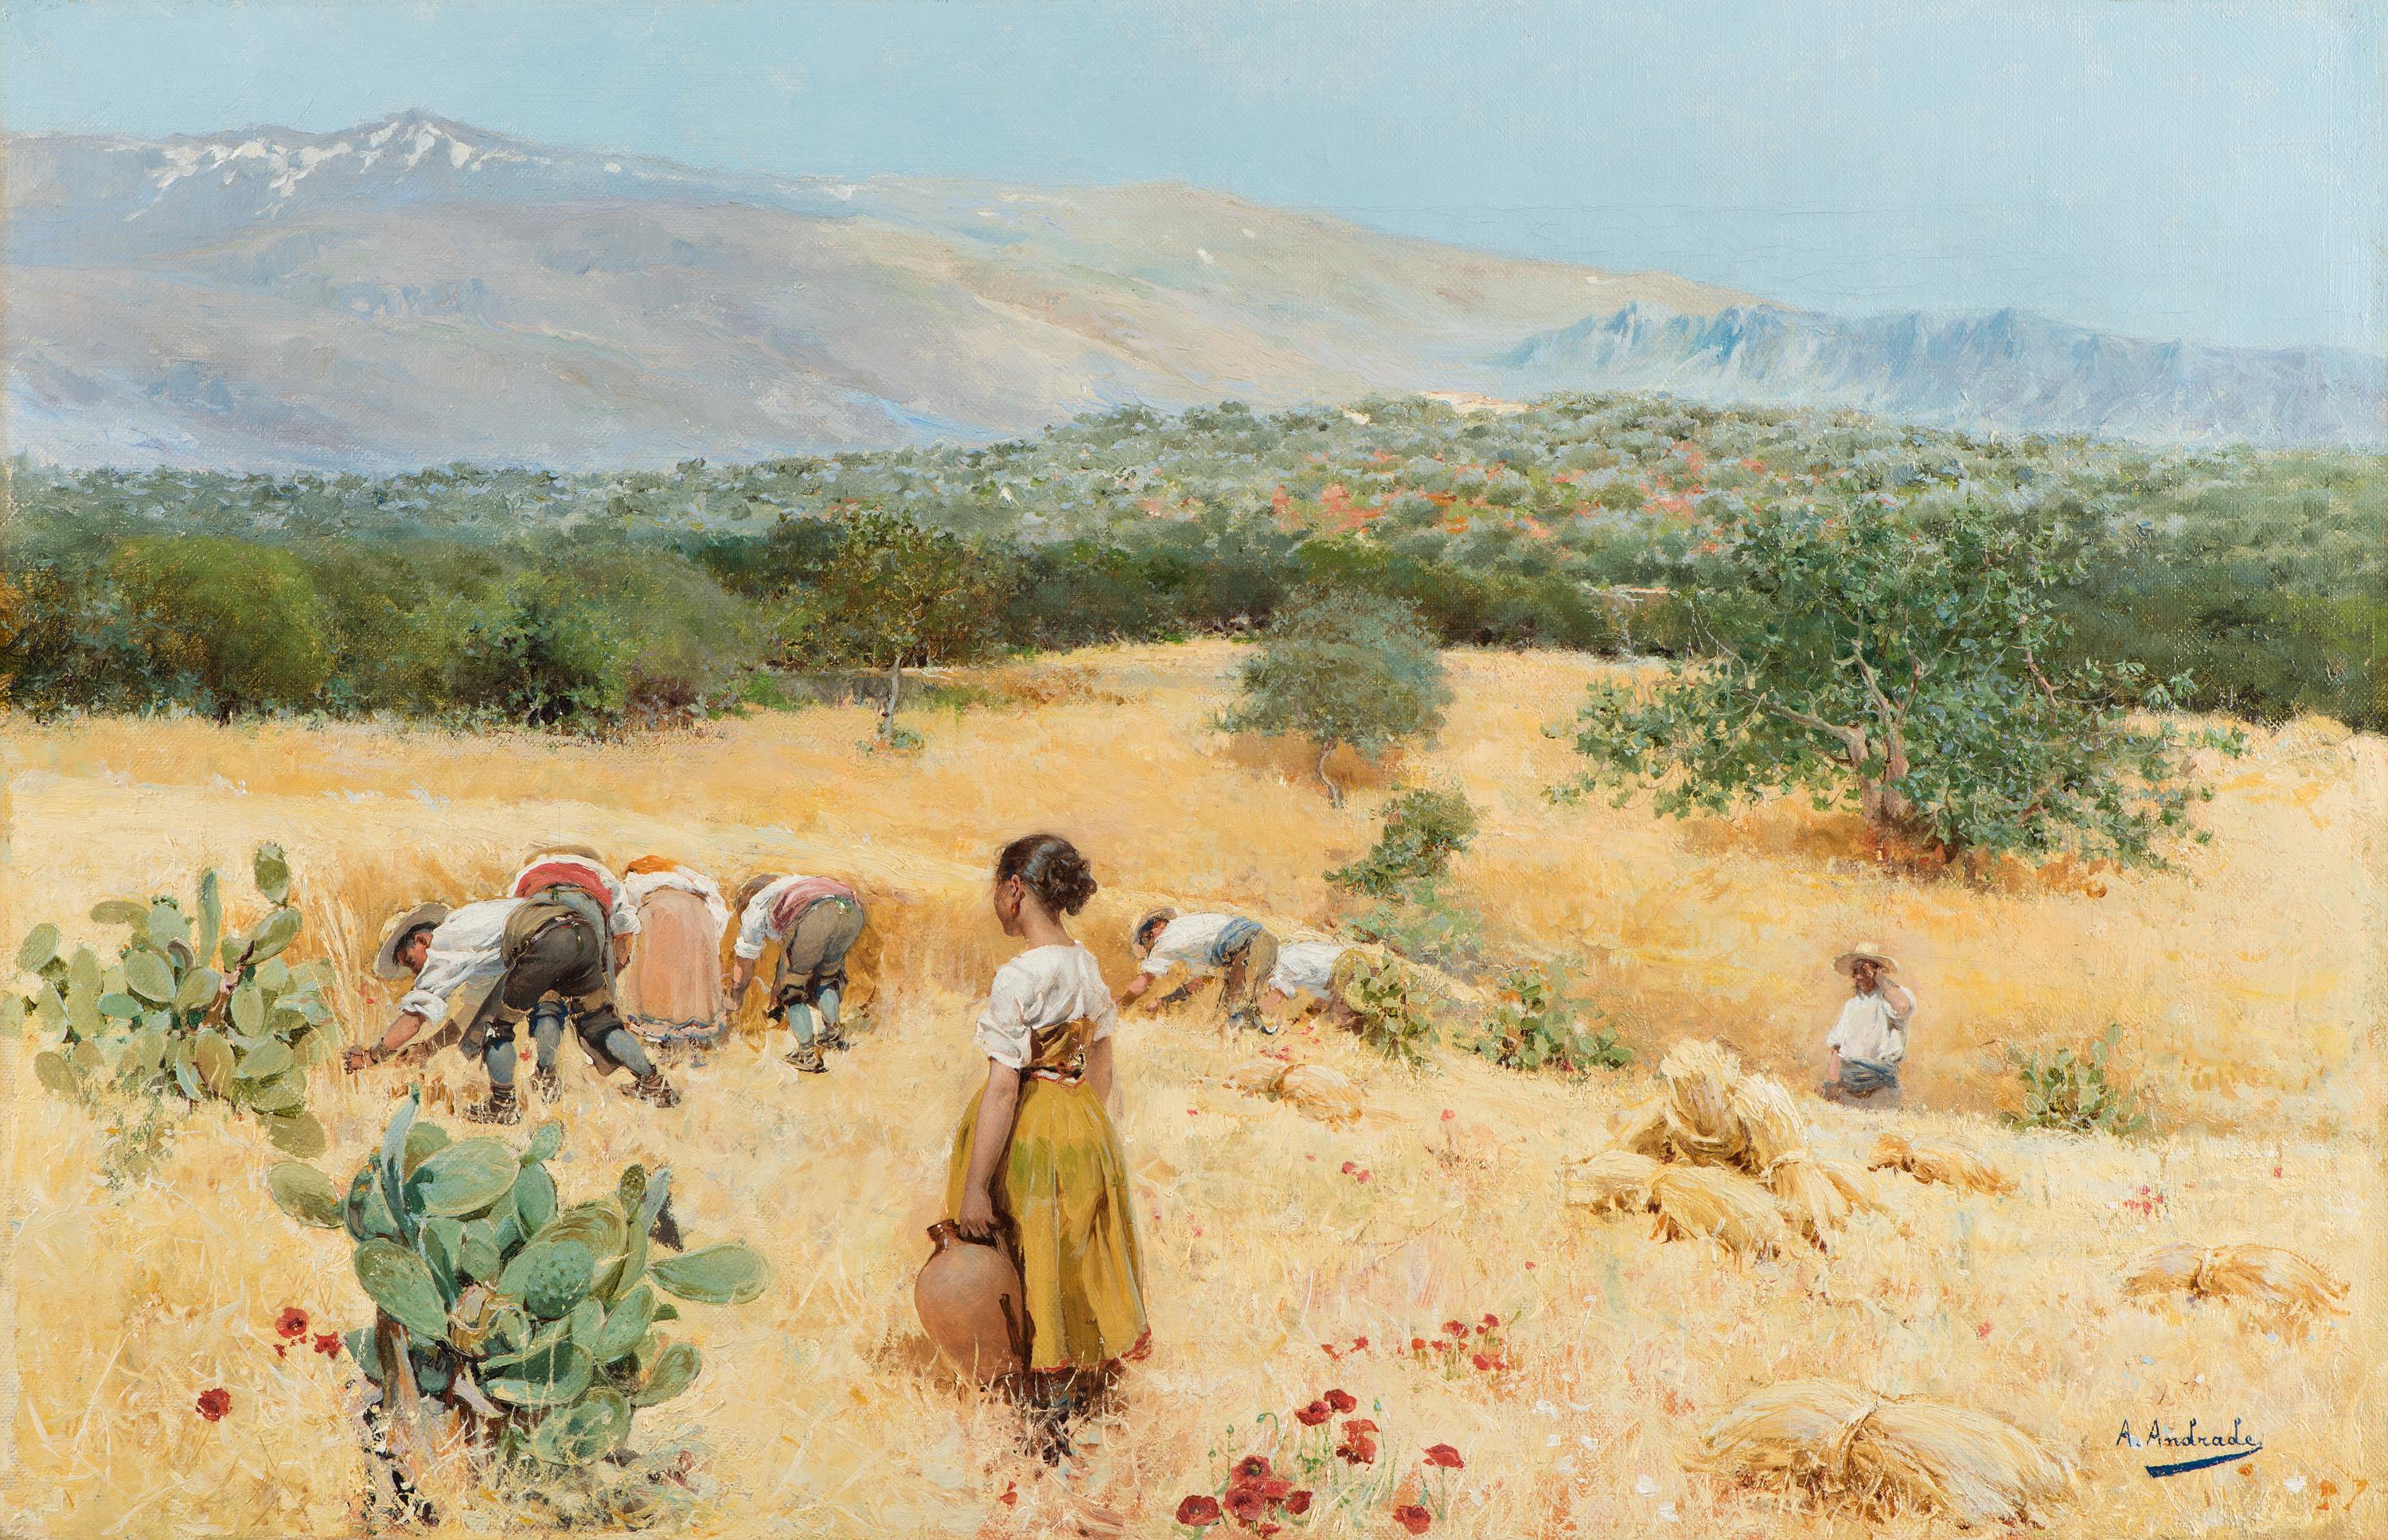 Angel Andrade Landscape Painting - The harvest at the foot of the mountains, Framed, Oil on canvas